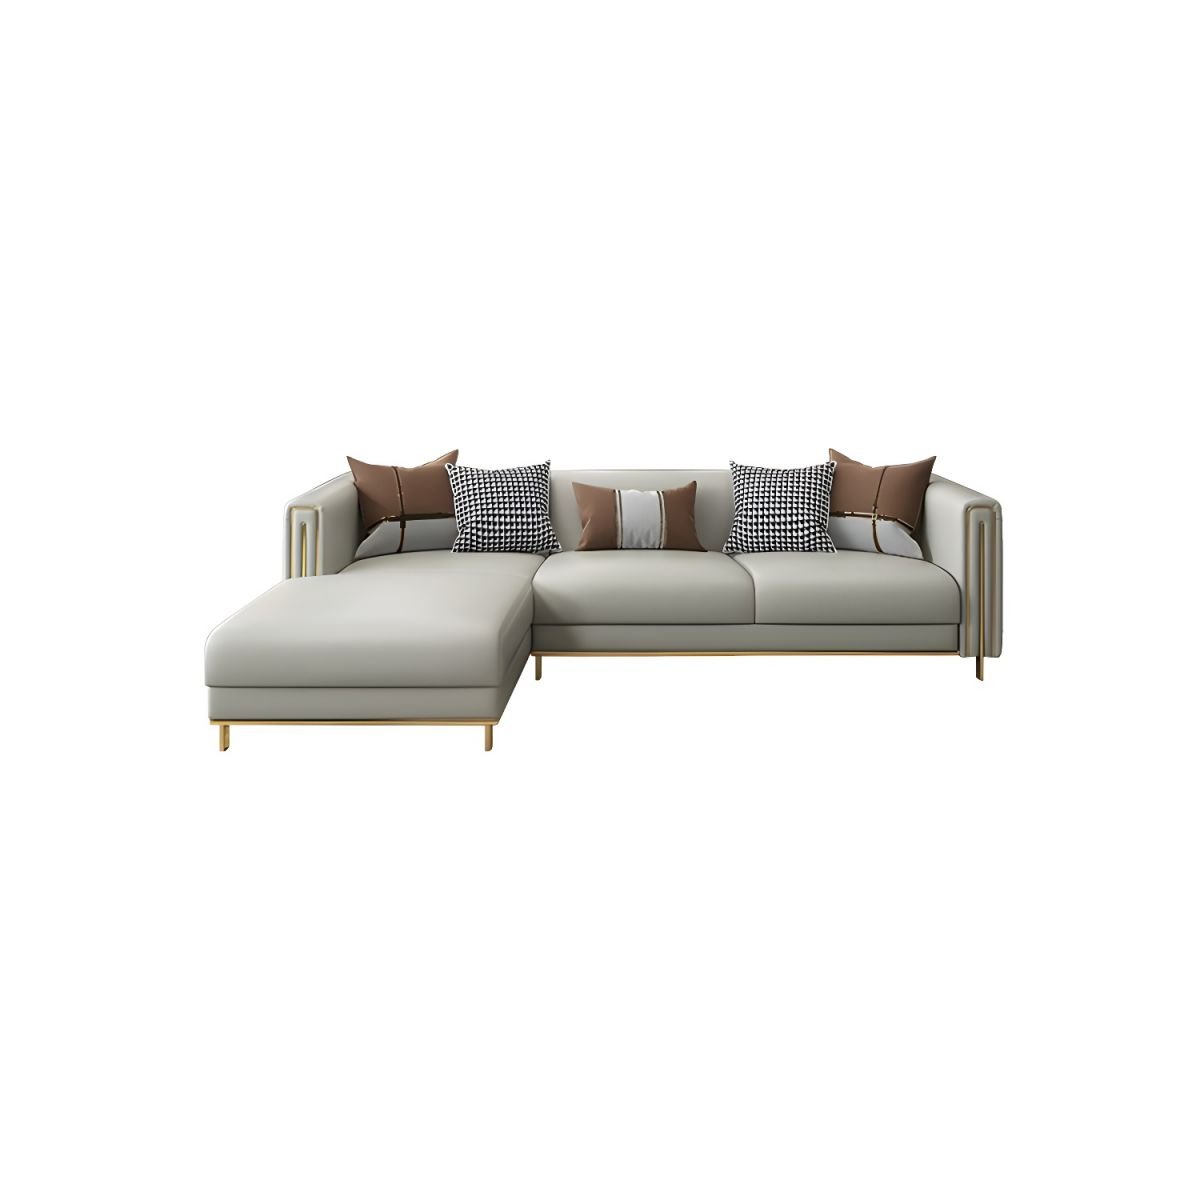 Beige Glam L-Shape Wooden Nappa Sofa Chaise with Square Arm, 26' Length - Left Nappa 94"L x 67"W x 29"H